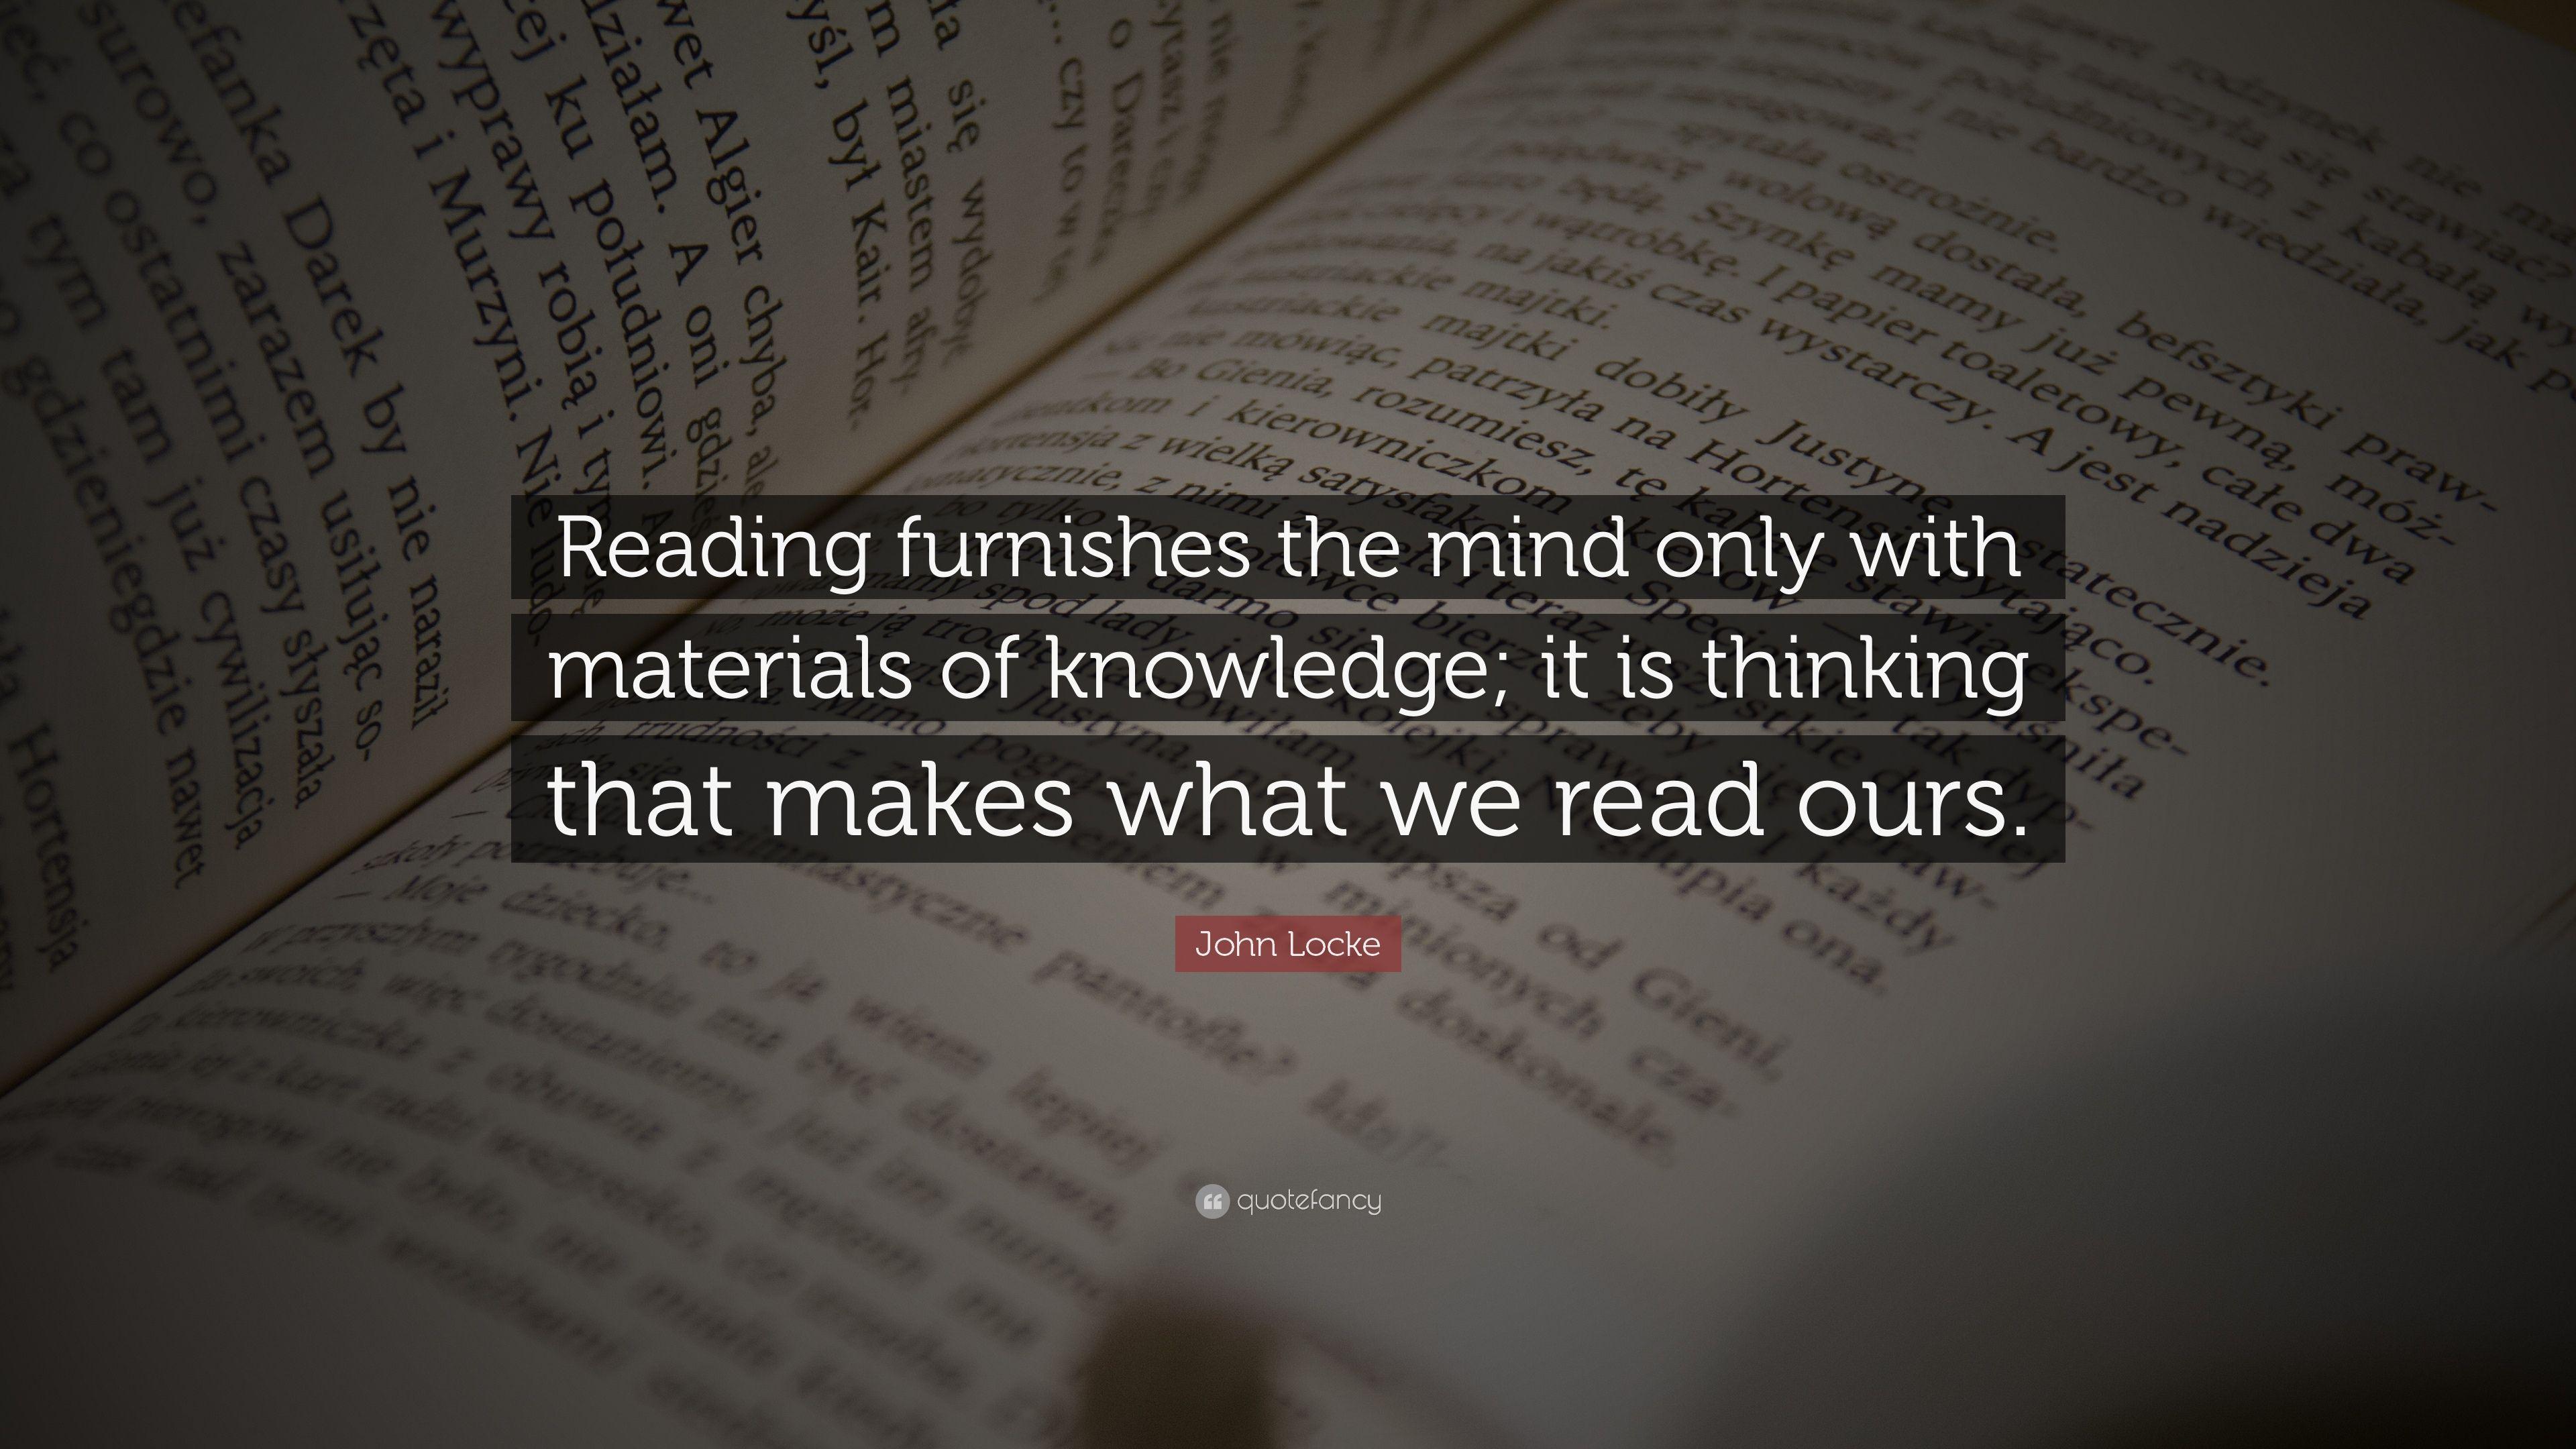 John Locke Quote: “Reading furnishes the mind only with materials